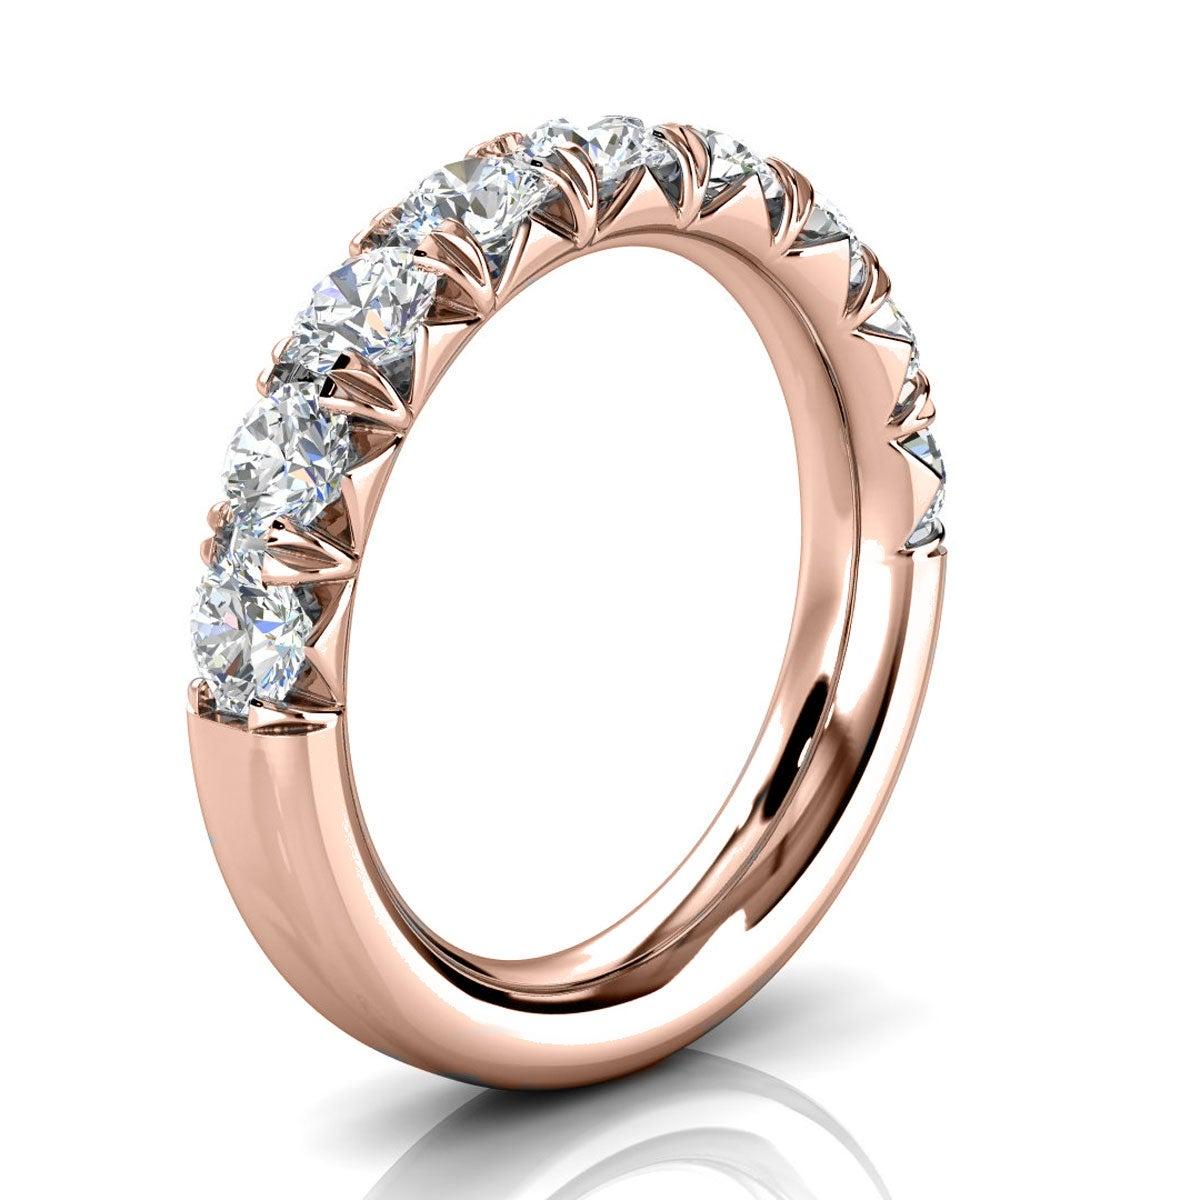 For Sale:  18k Rose Gold Voyage French Pave Diamond Ring '1 1/2 Ct. Tw' 2